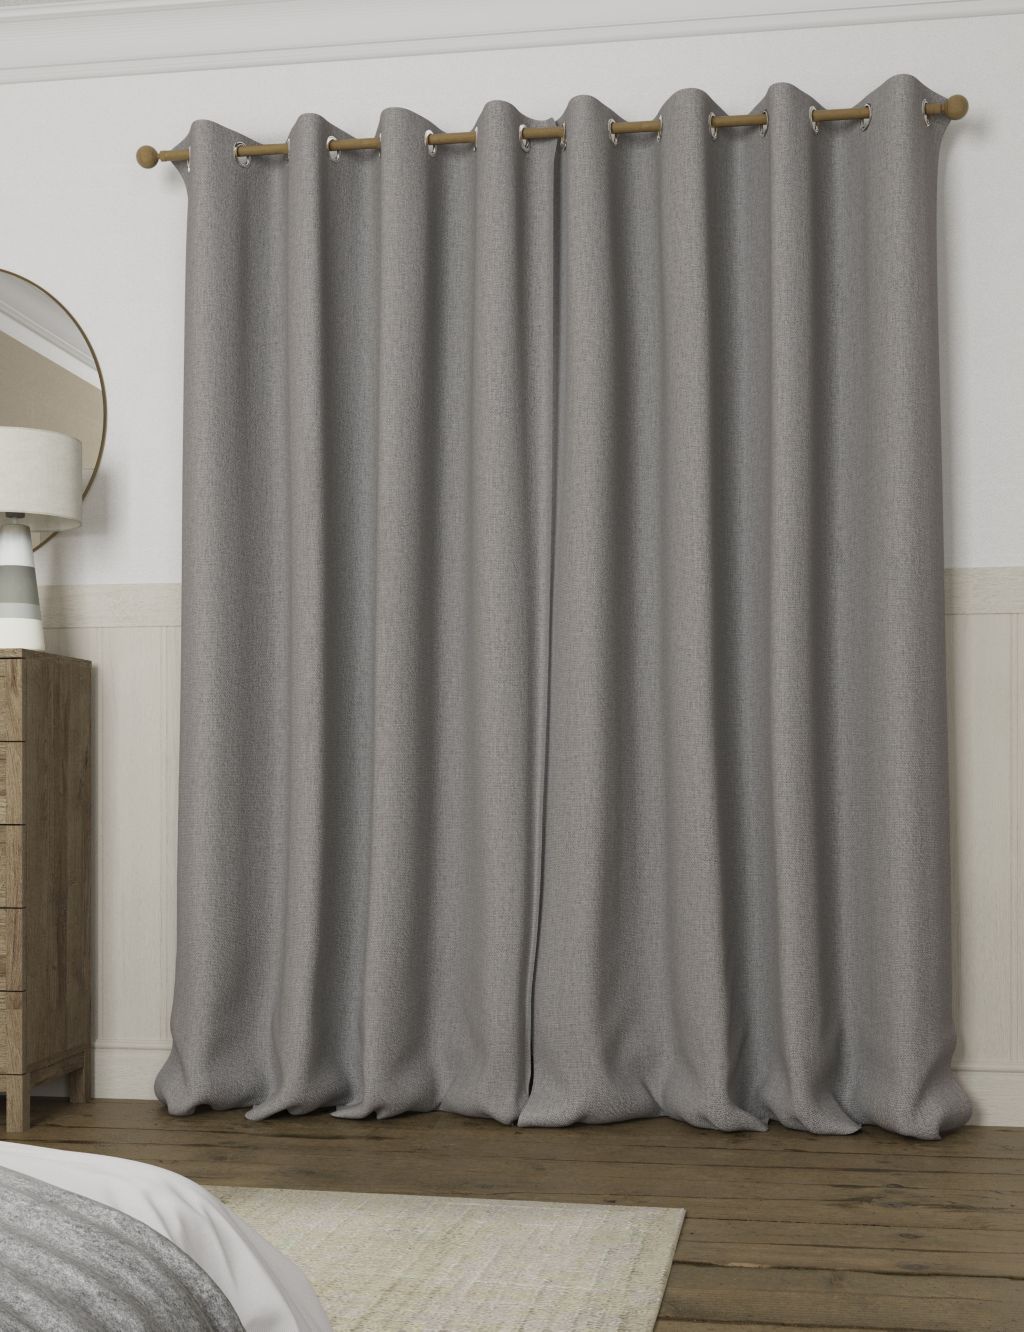 Anti Allergy Eyelet Blackout Temperature Smart Curtains image 4